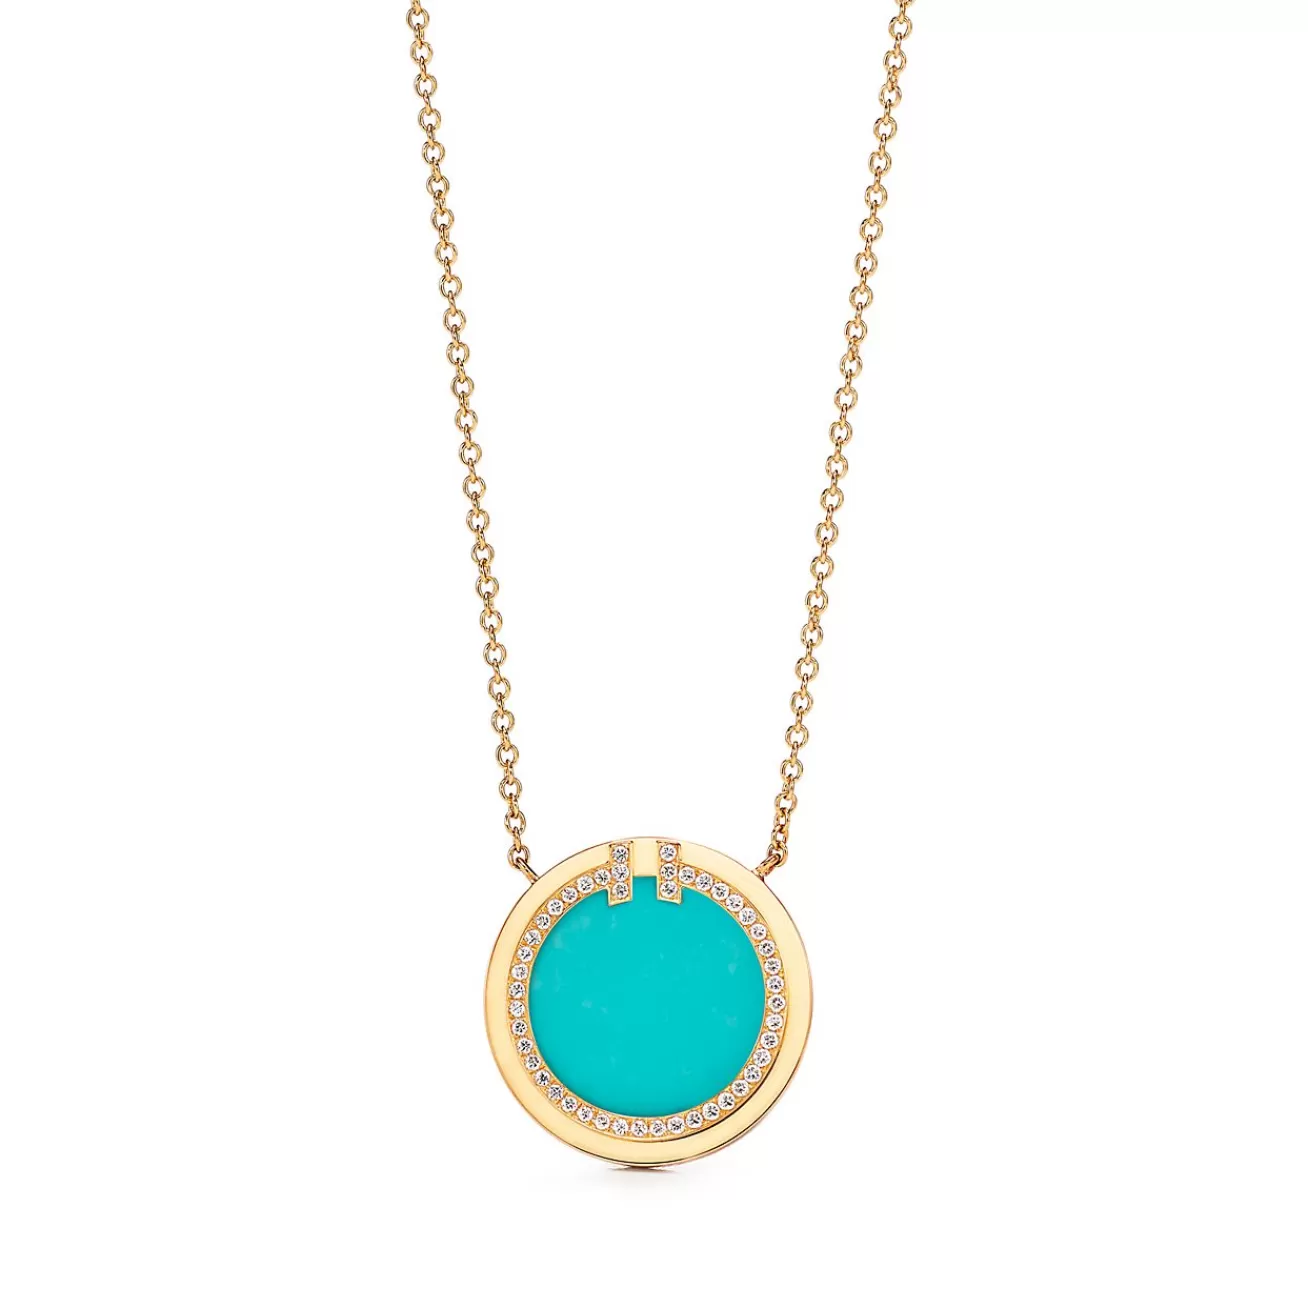 Tiffany & Co. Tiffany T diamond and turquoise circle pendant in 18k gold. | ^ Necklaces & Pendants | Gold Jewelry